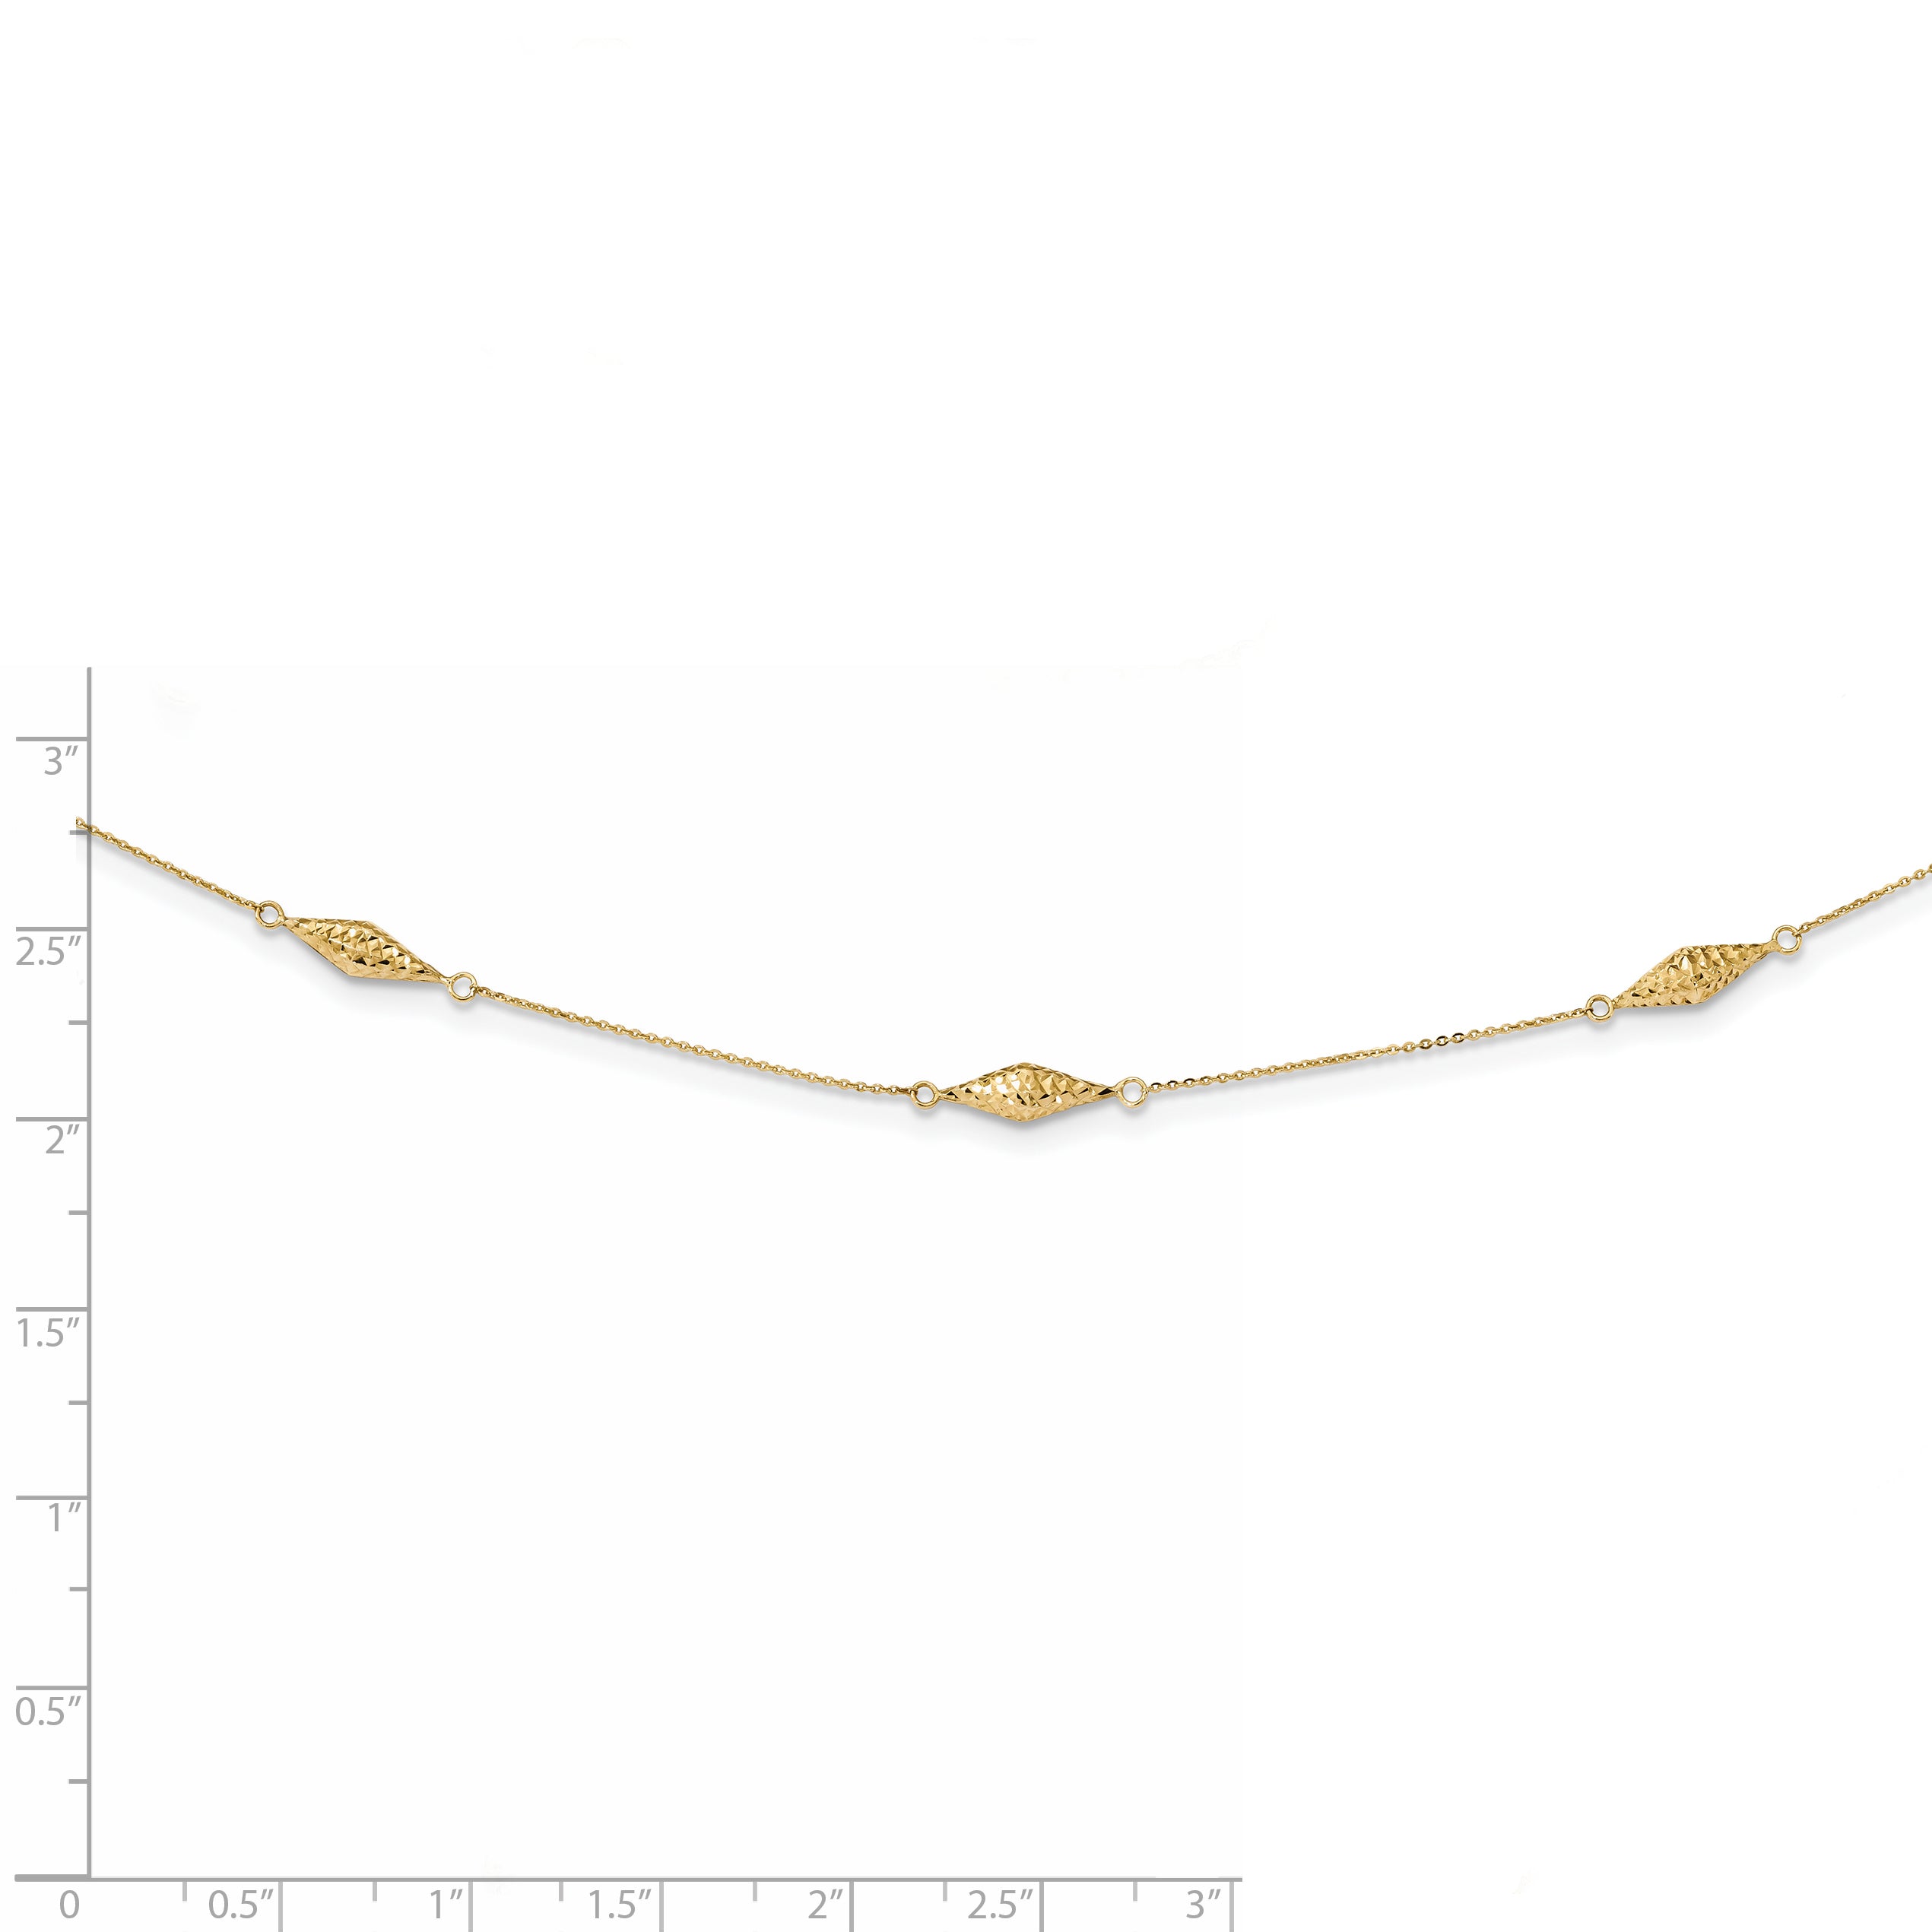 14k Polished and D/C Fancy Beaded 18in Necklace